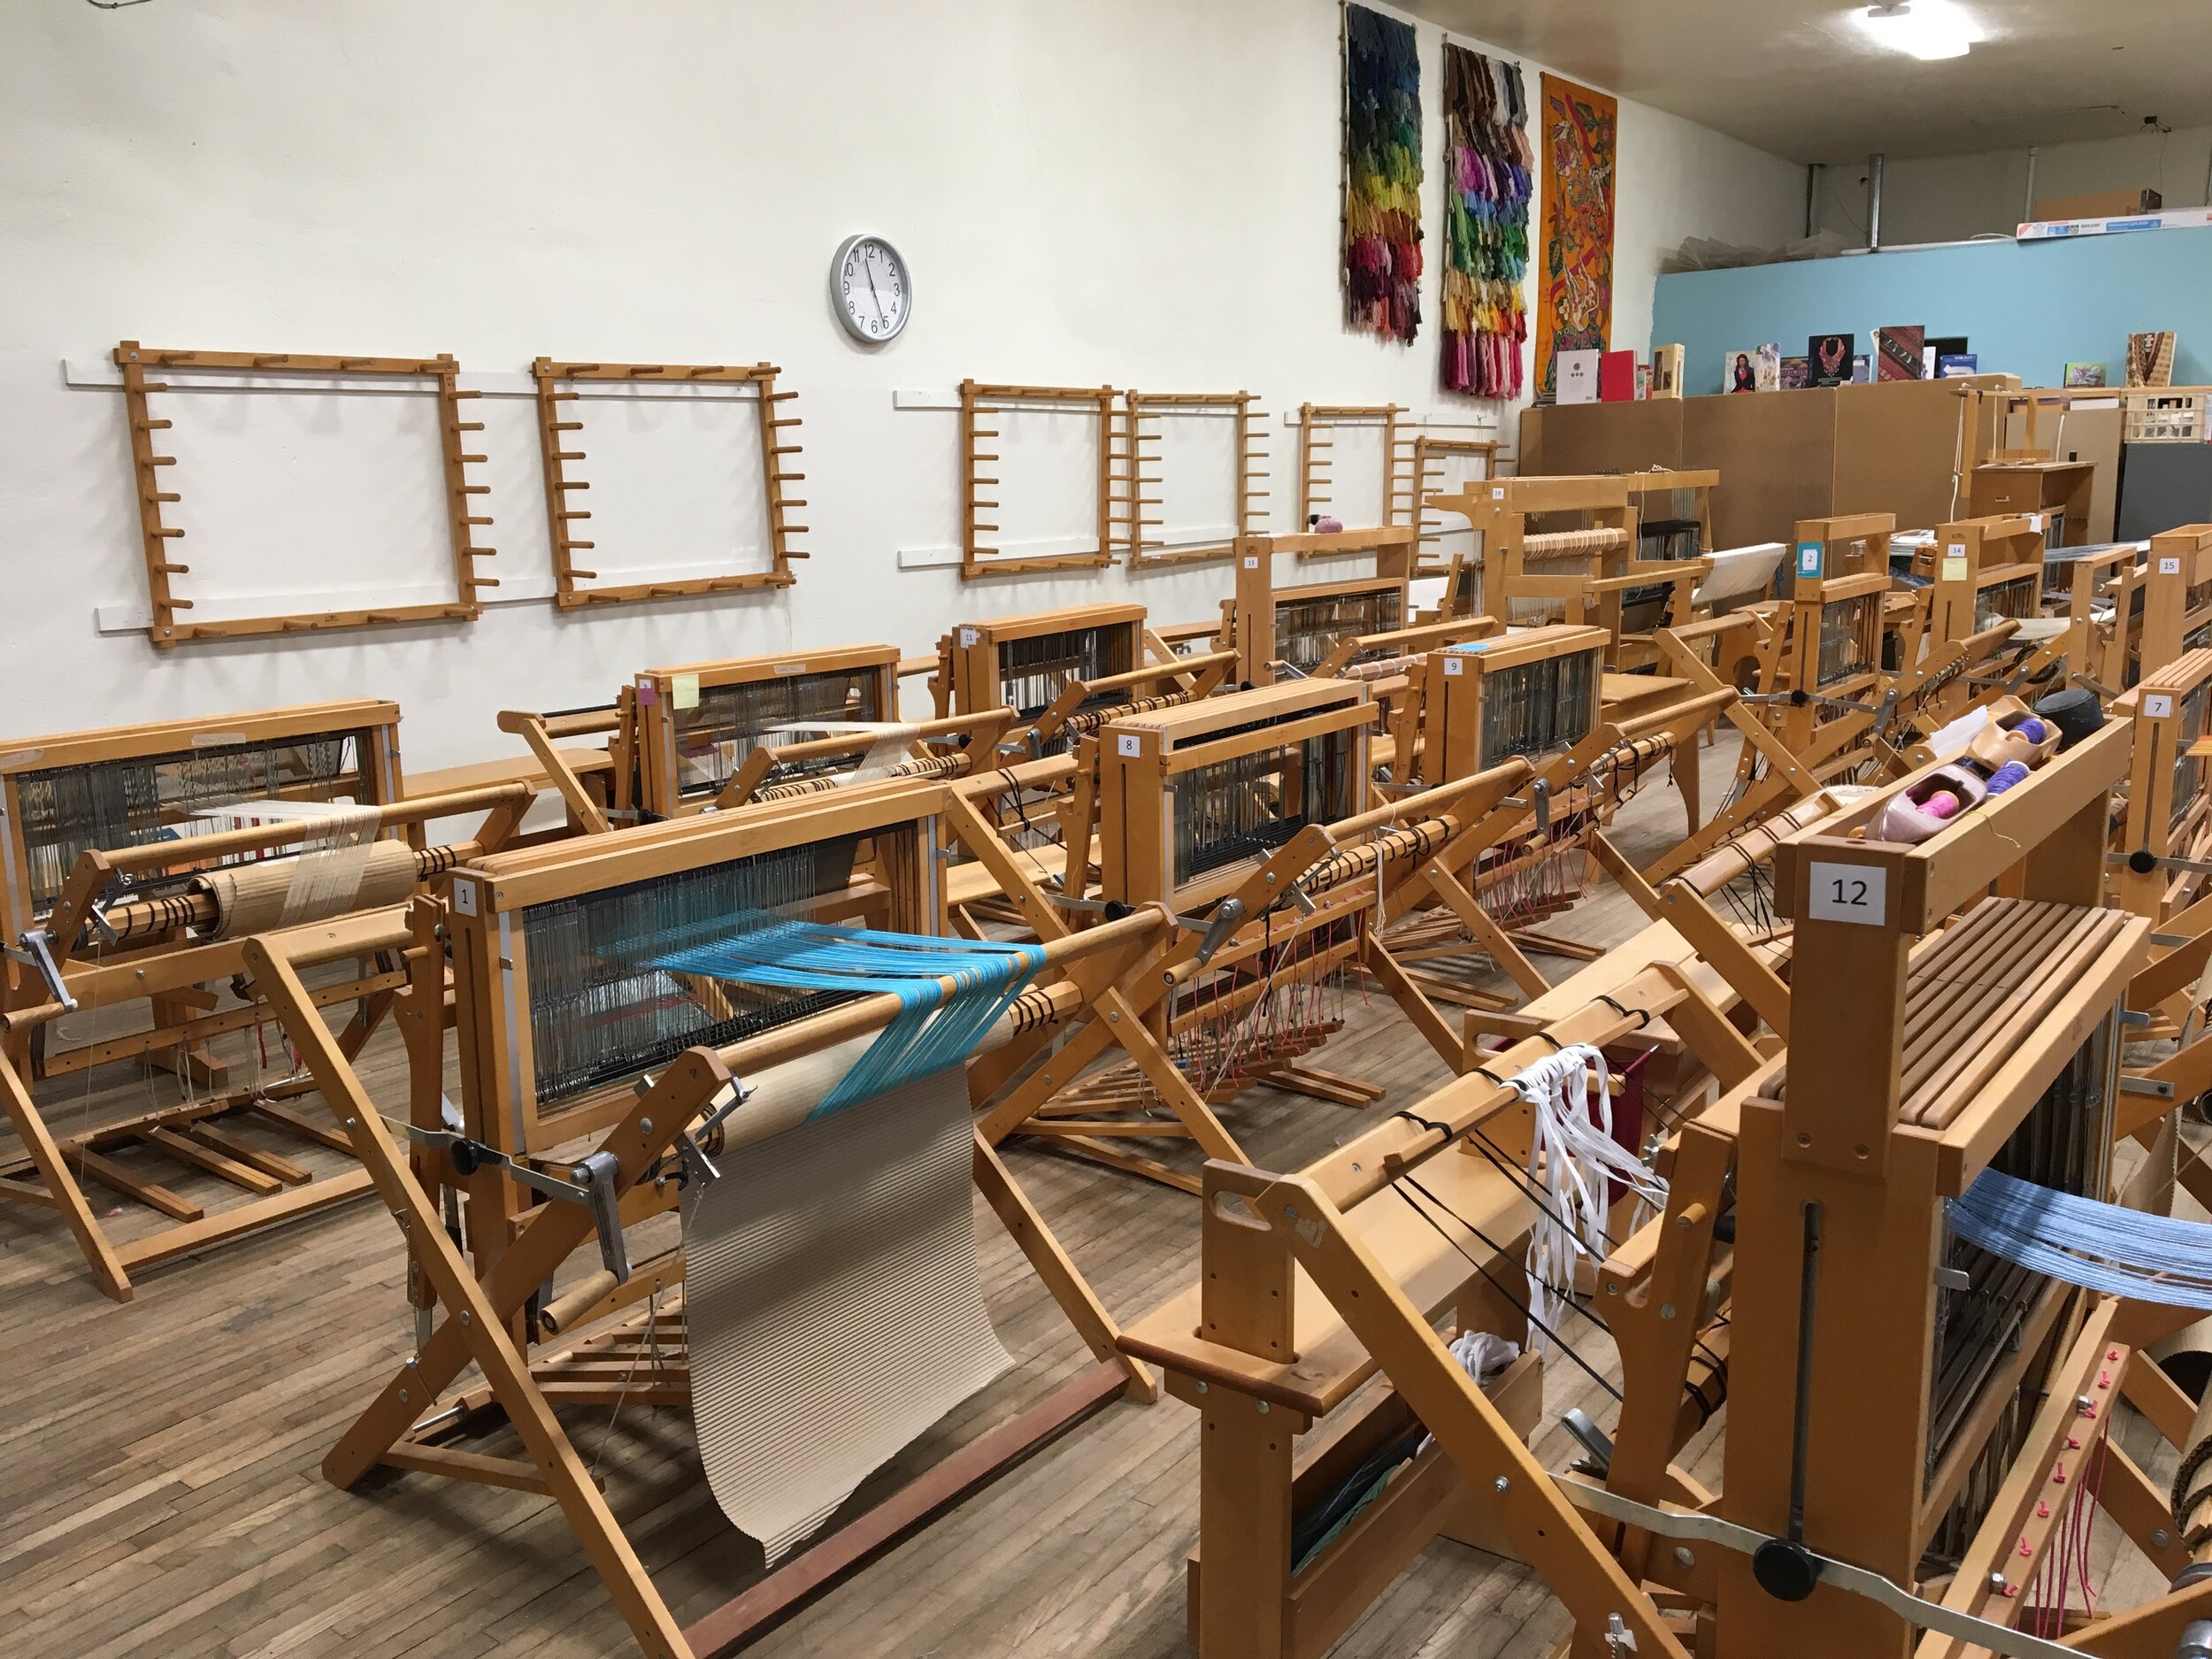 The Friendly Loom: A Chance for Collaborative Art - The Art of Education  University